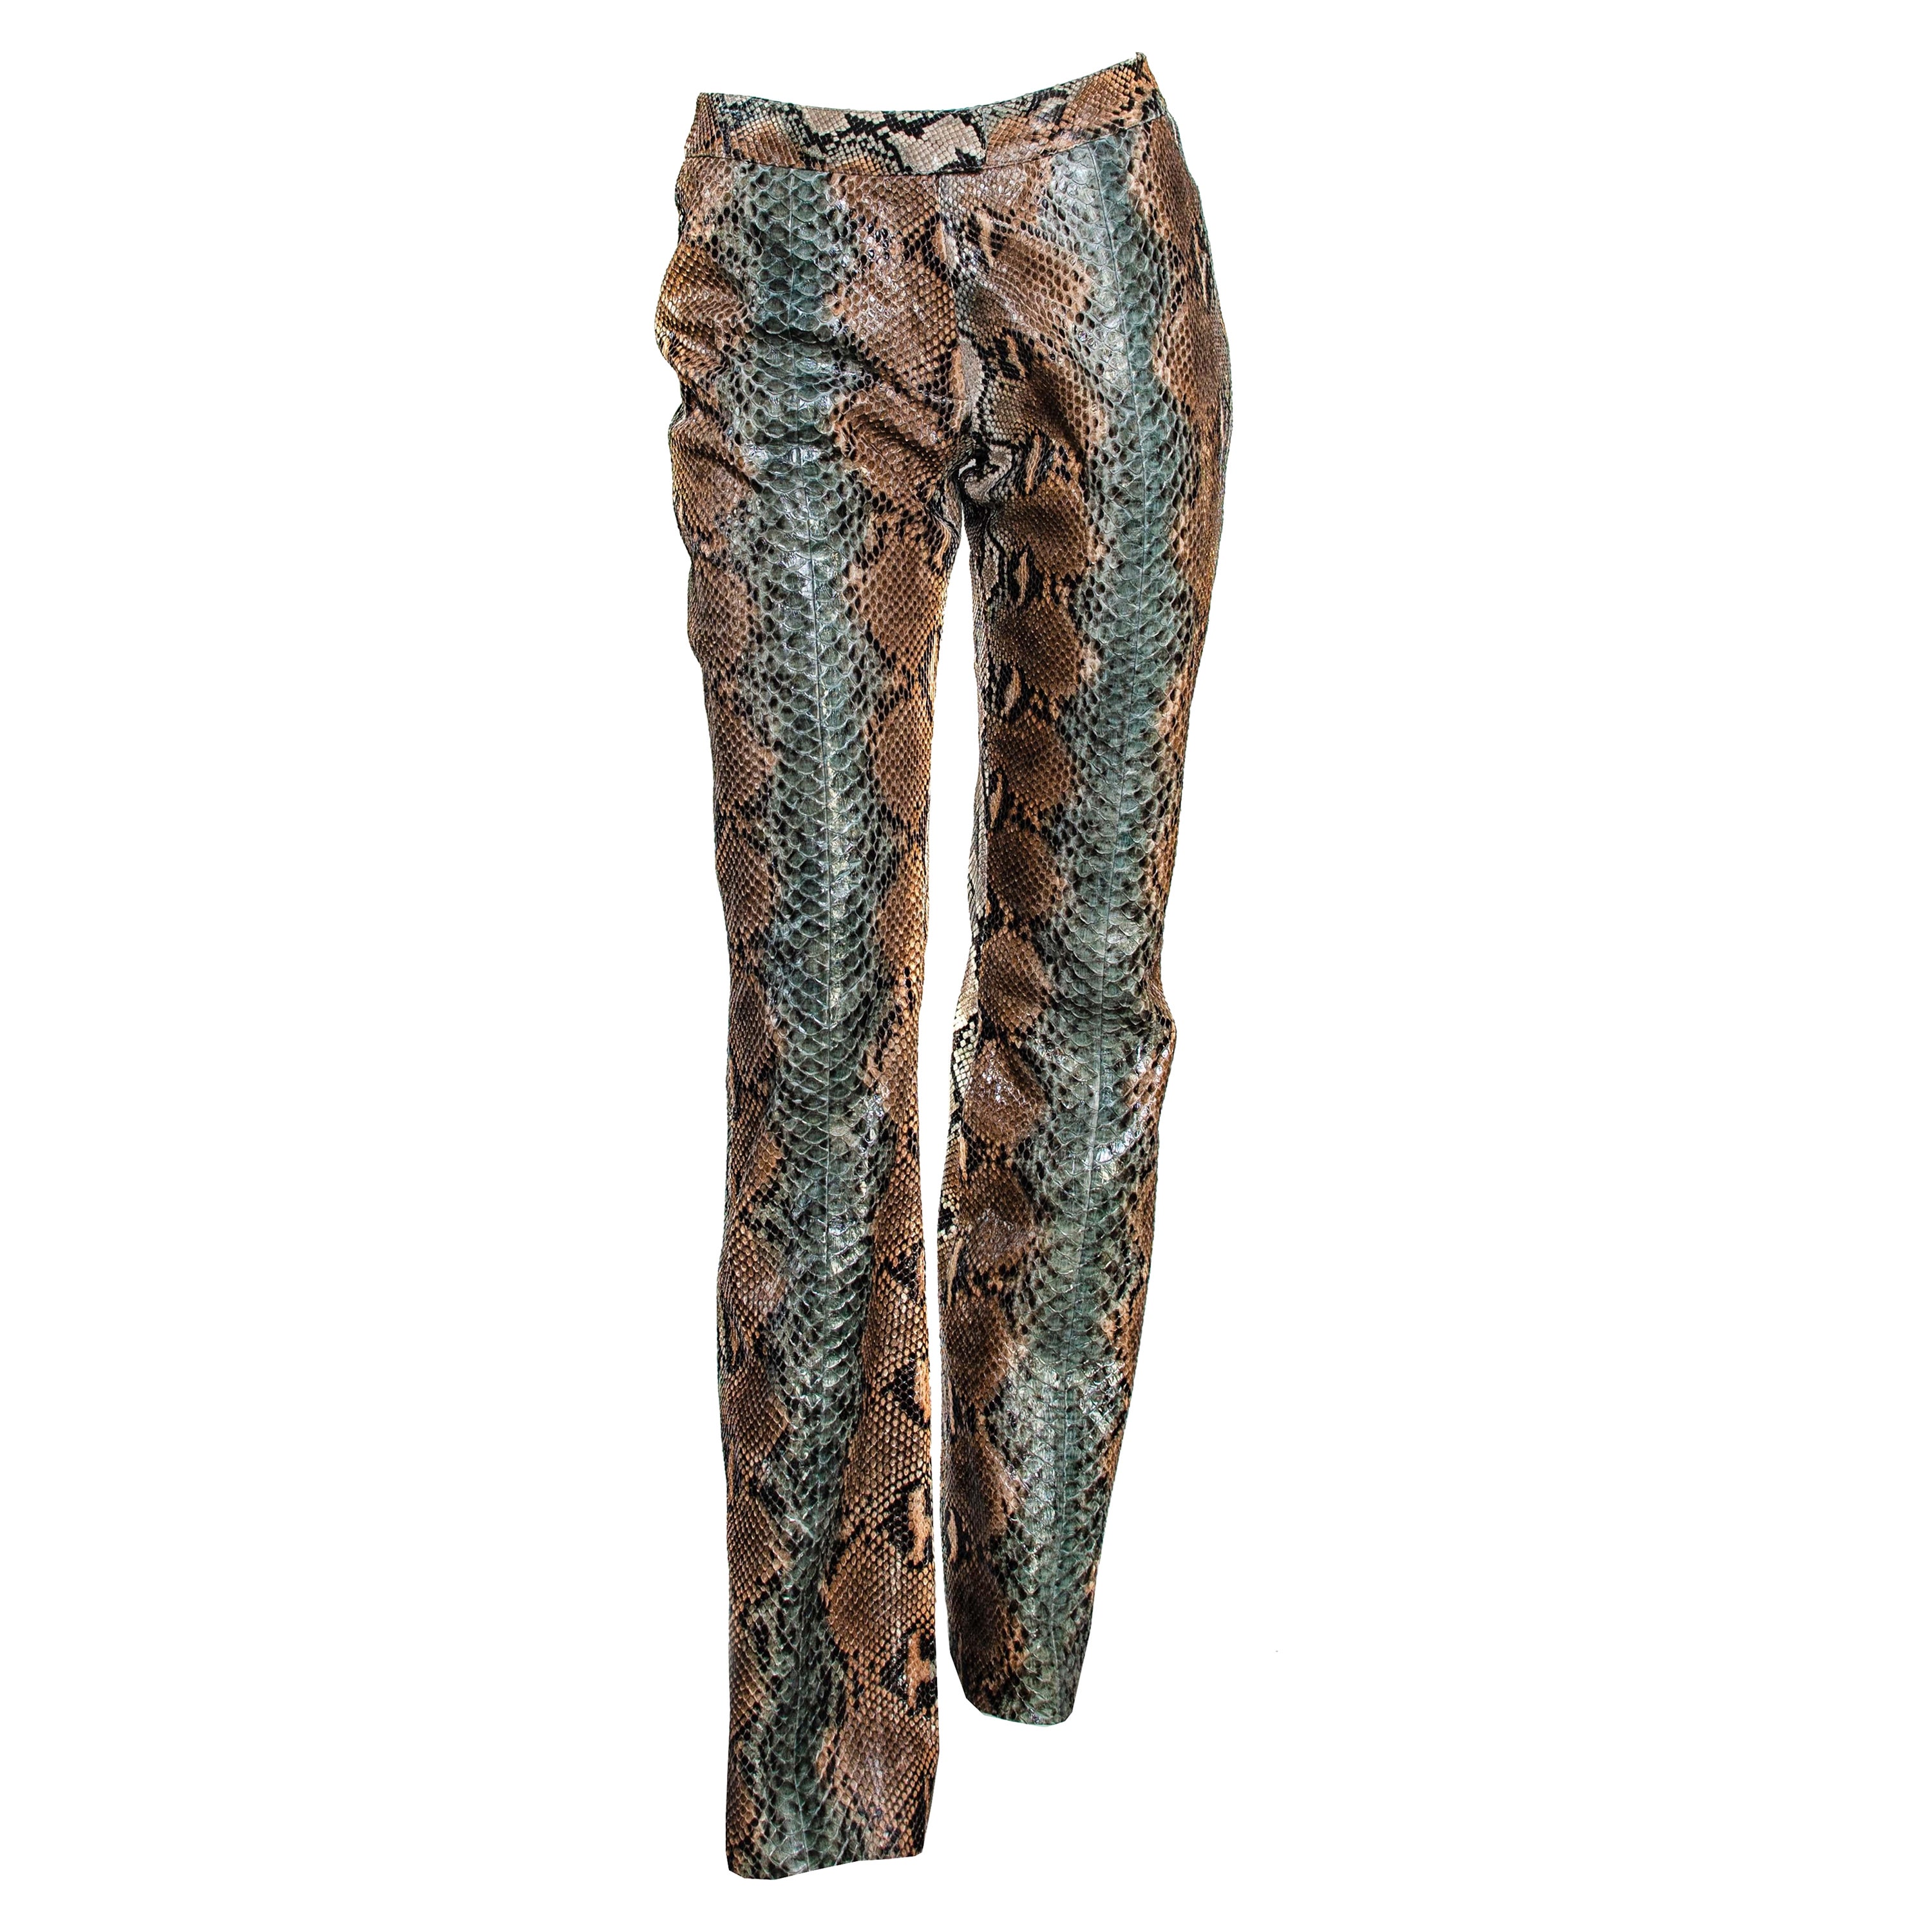 S/S 2000 Gucci by Tom Ford Python Flared Pants 